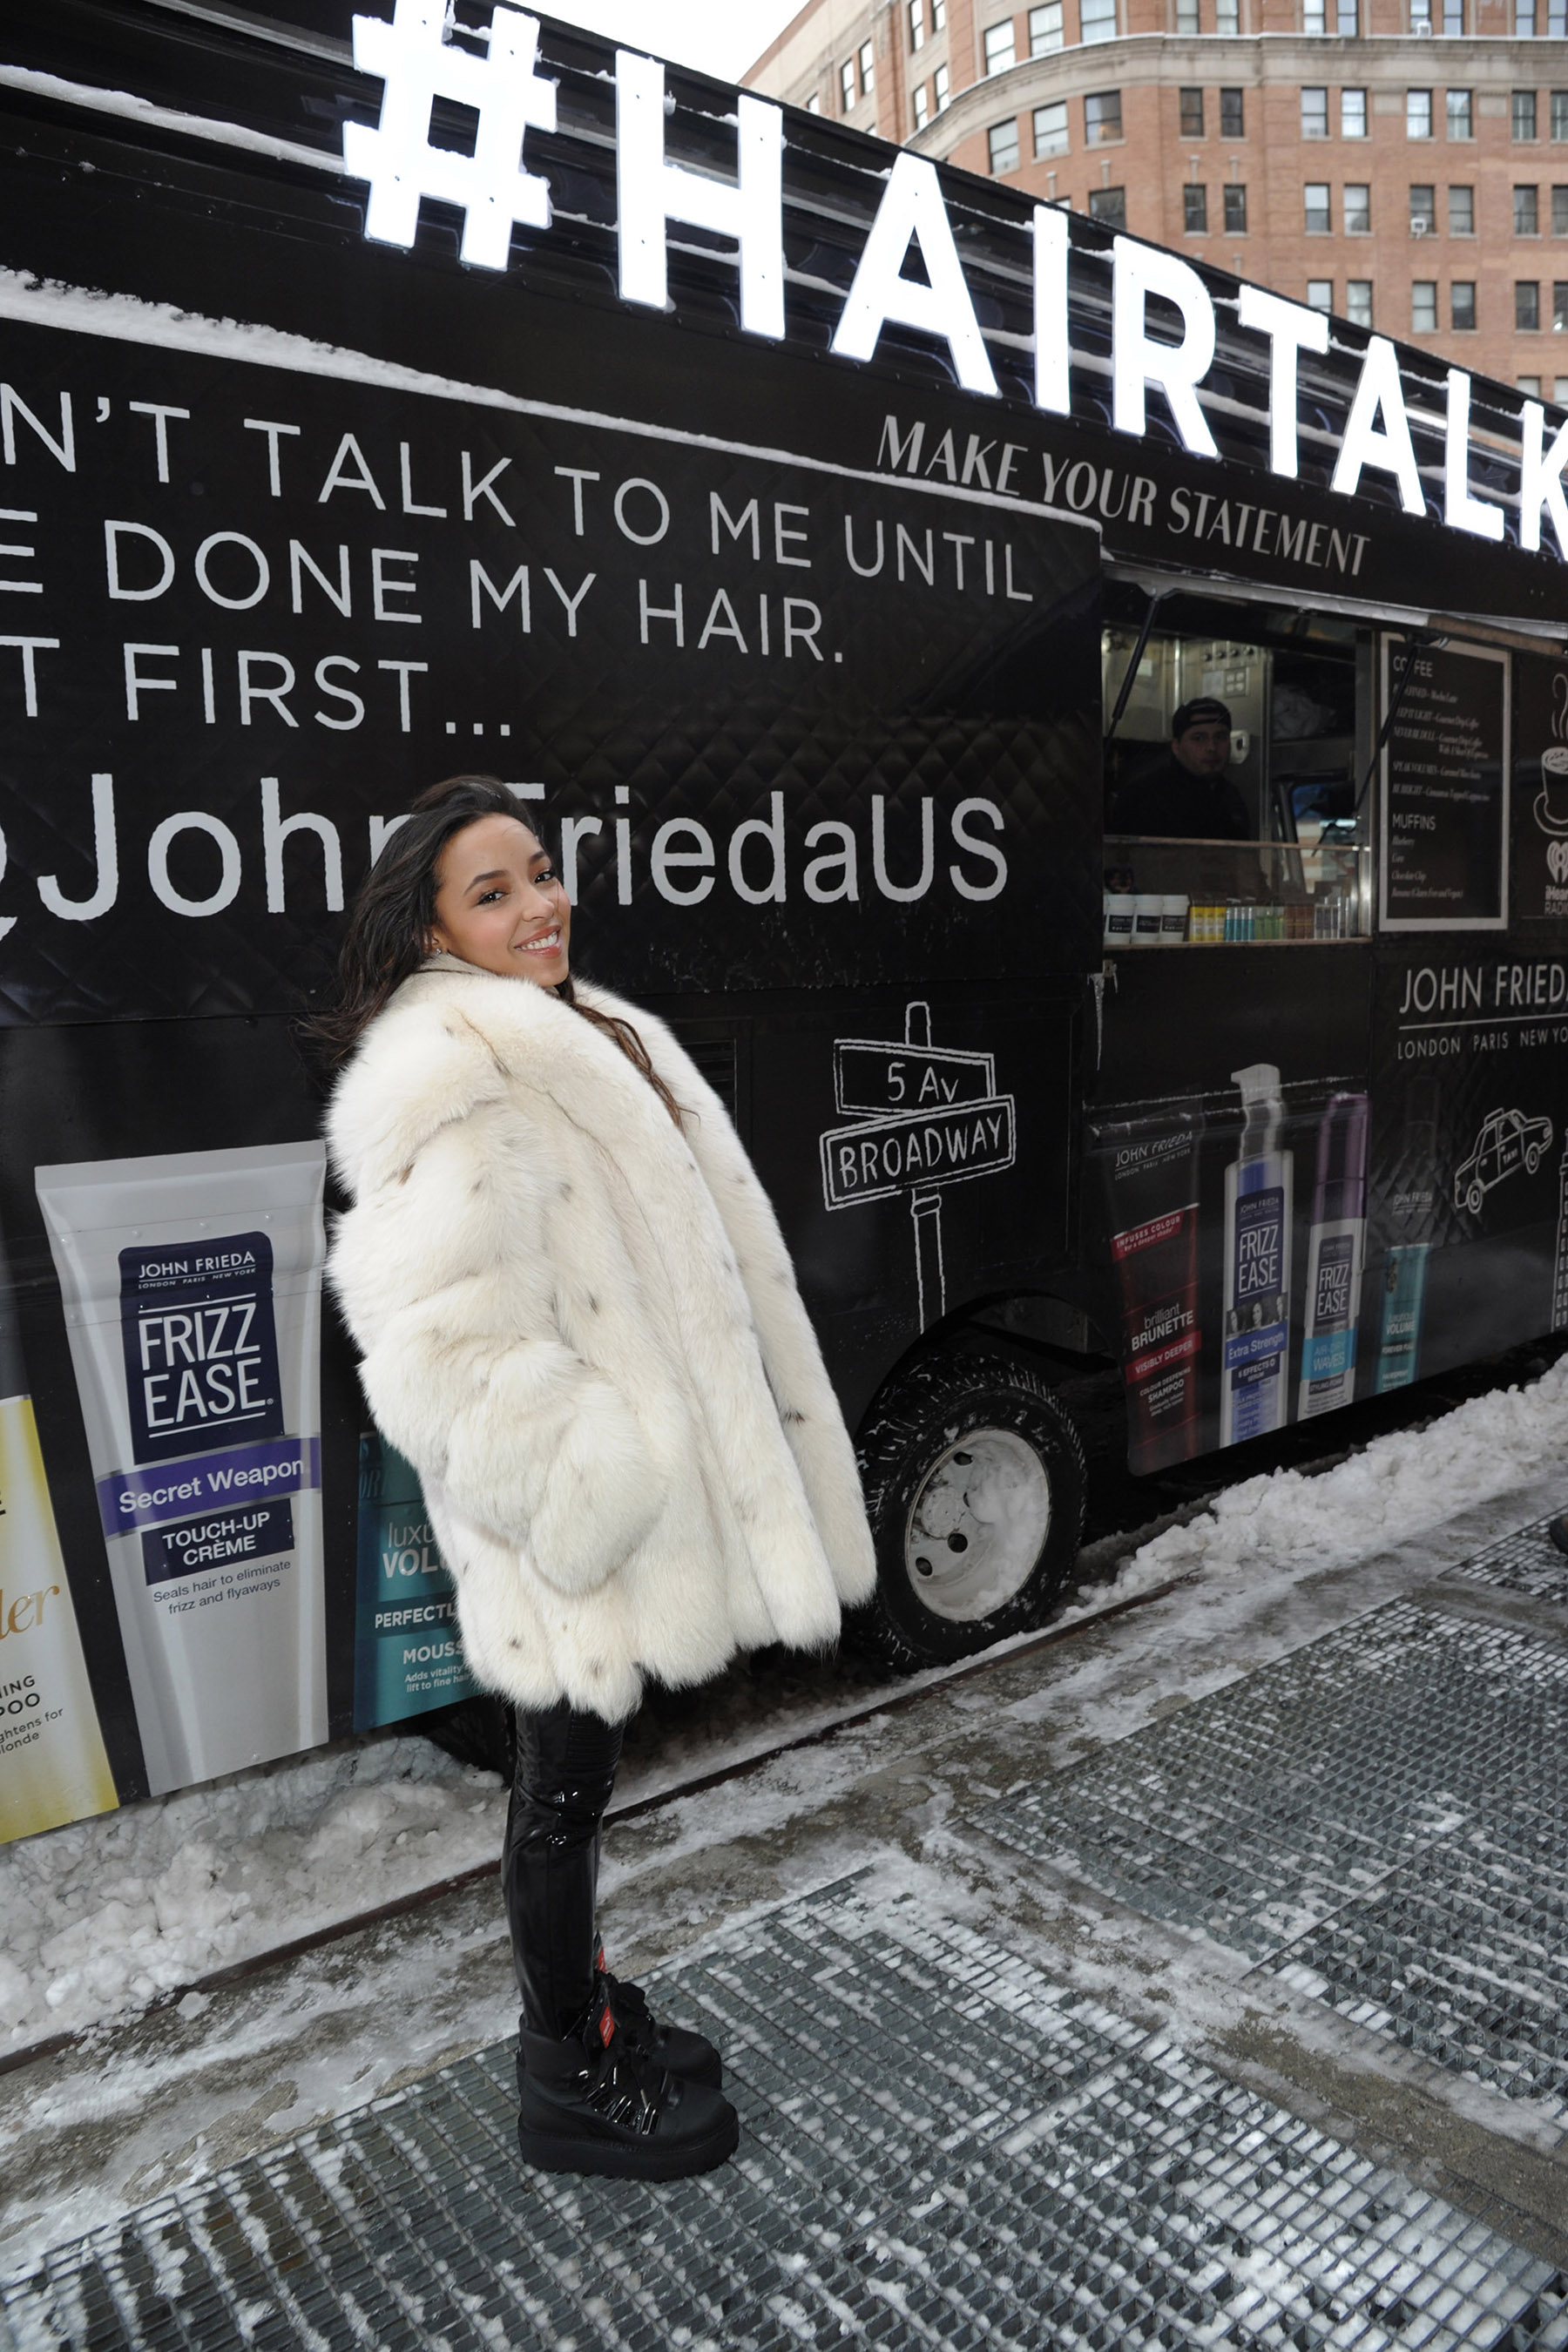 Tinashe visits the John Frieda® Hair Care coffee truck in NYC